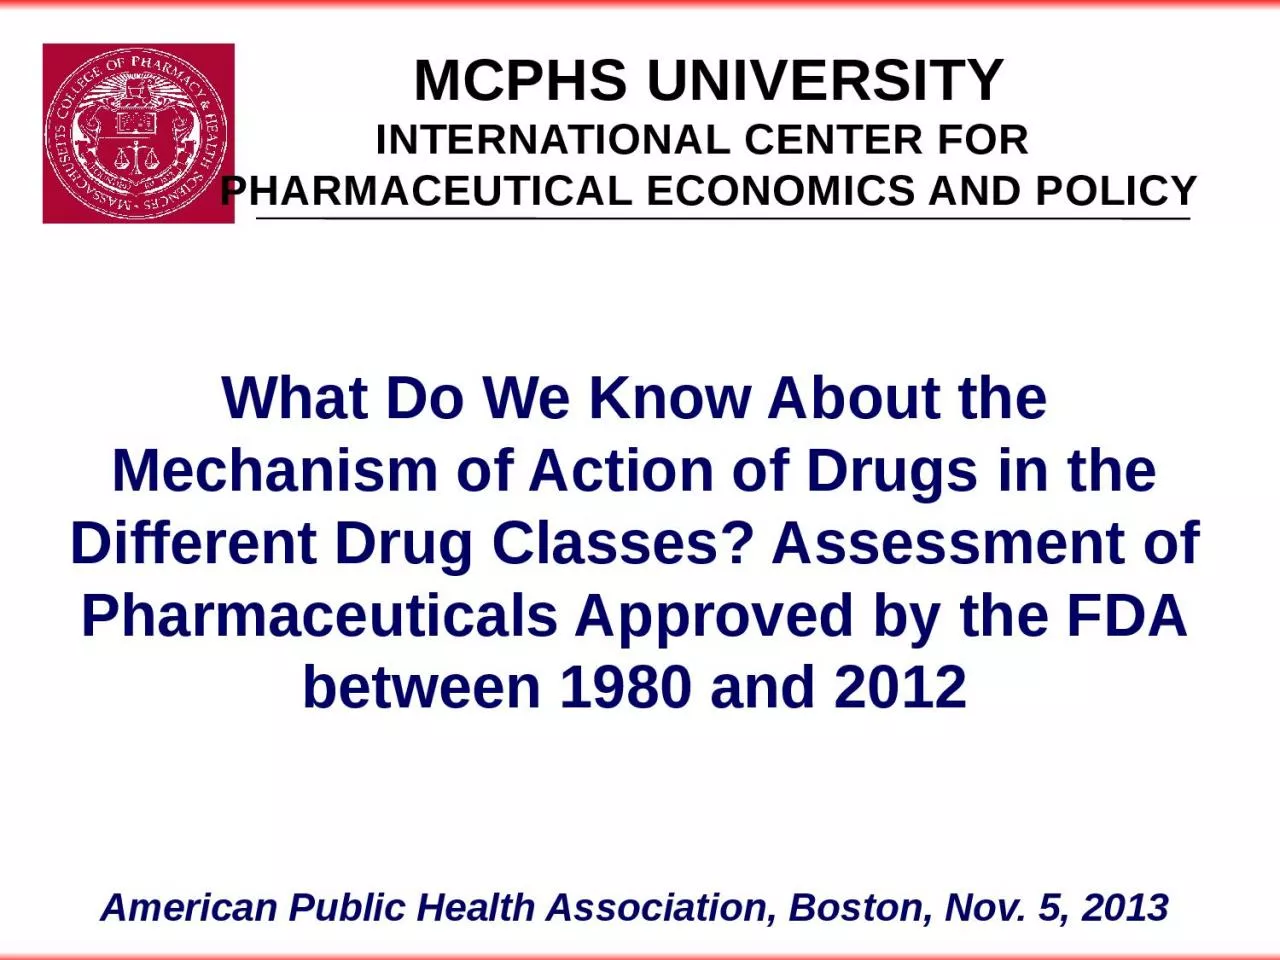 What Do We Know About the Mechanism of Action of Drugs in the Different Drug Classes?